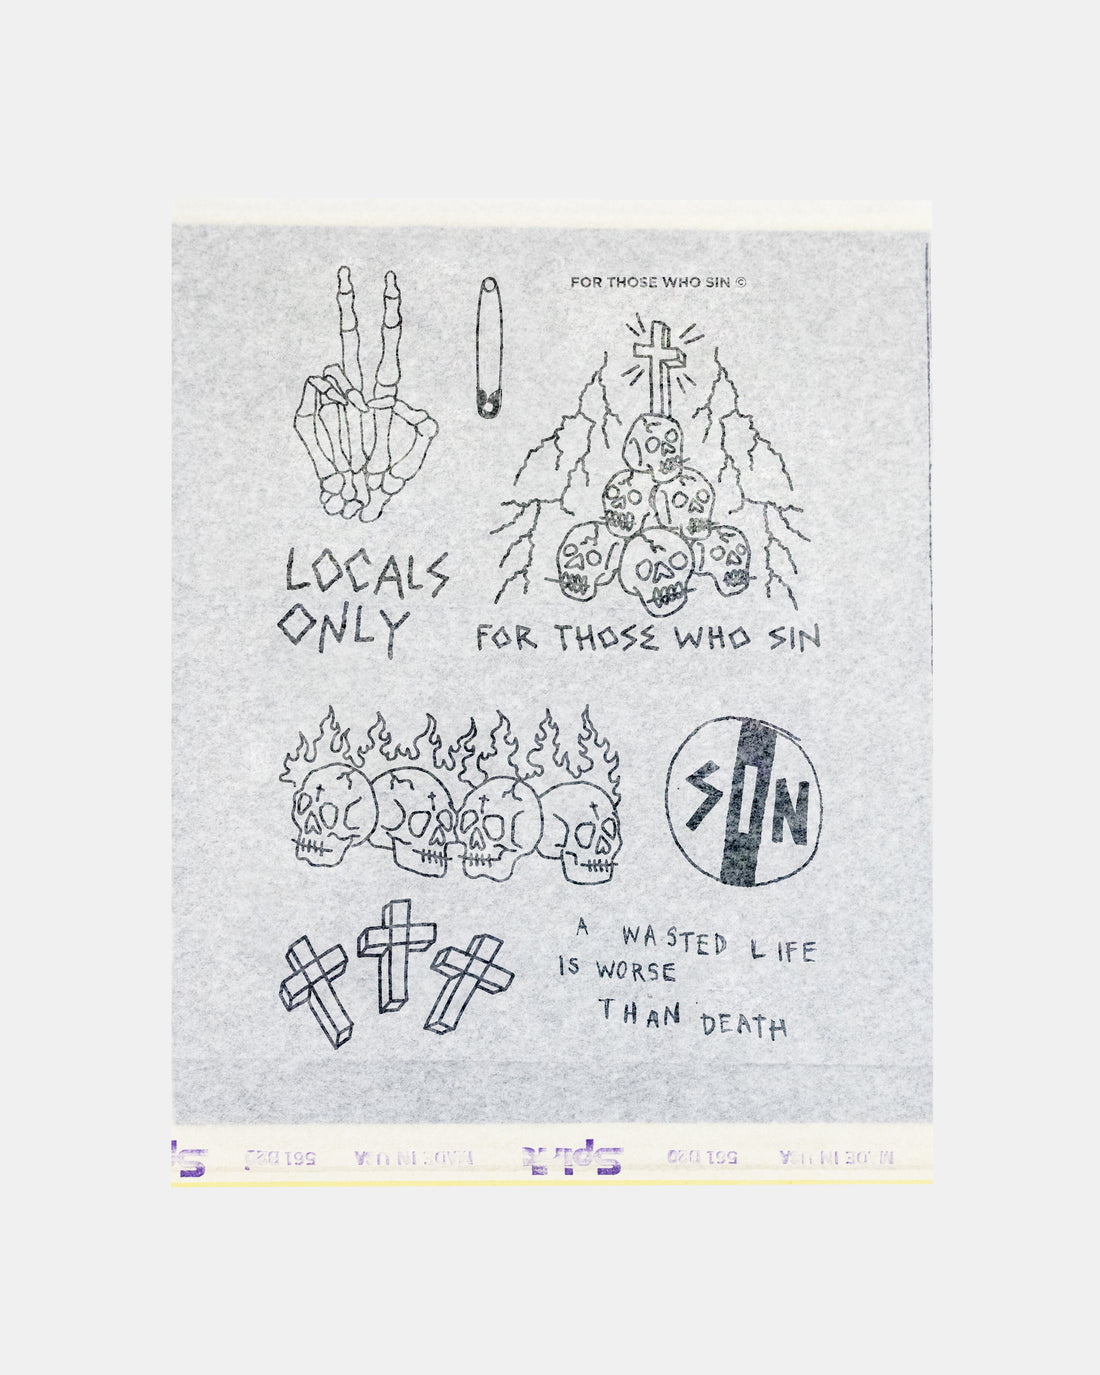 FTWS TATTOO FLASH ED. 3 "LOCALS ONLY"